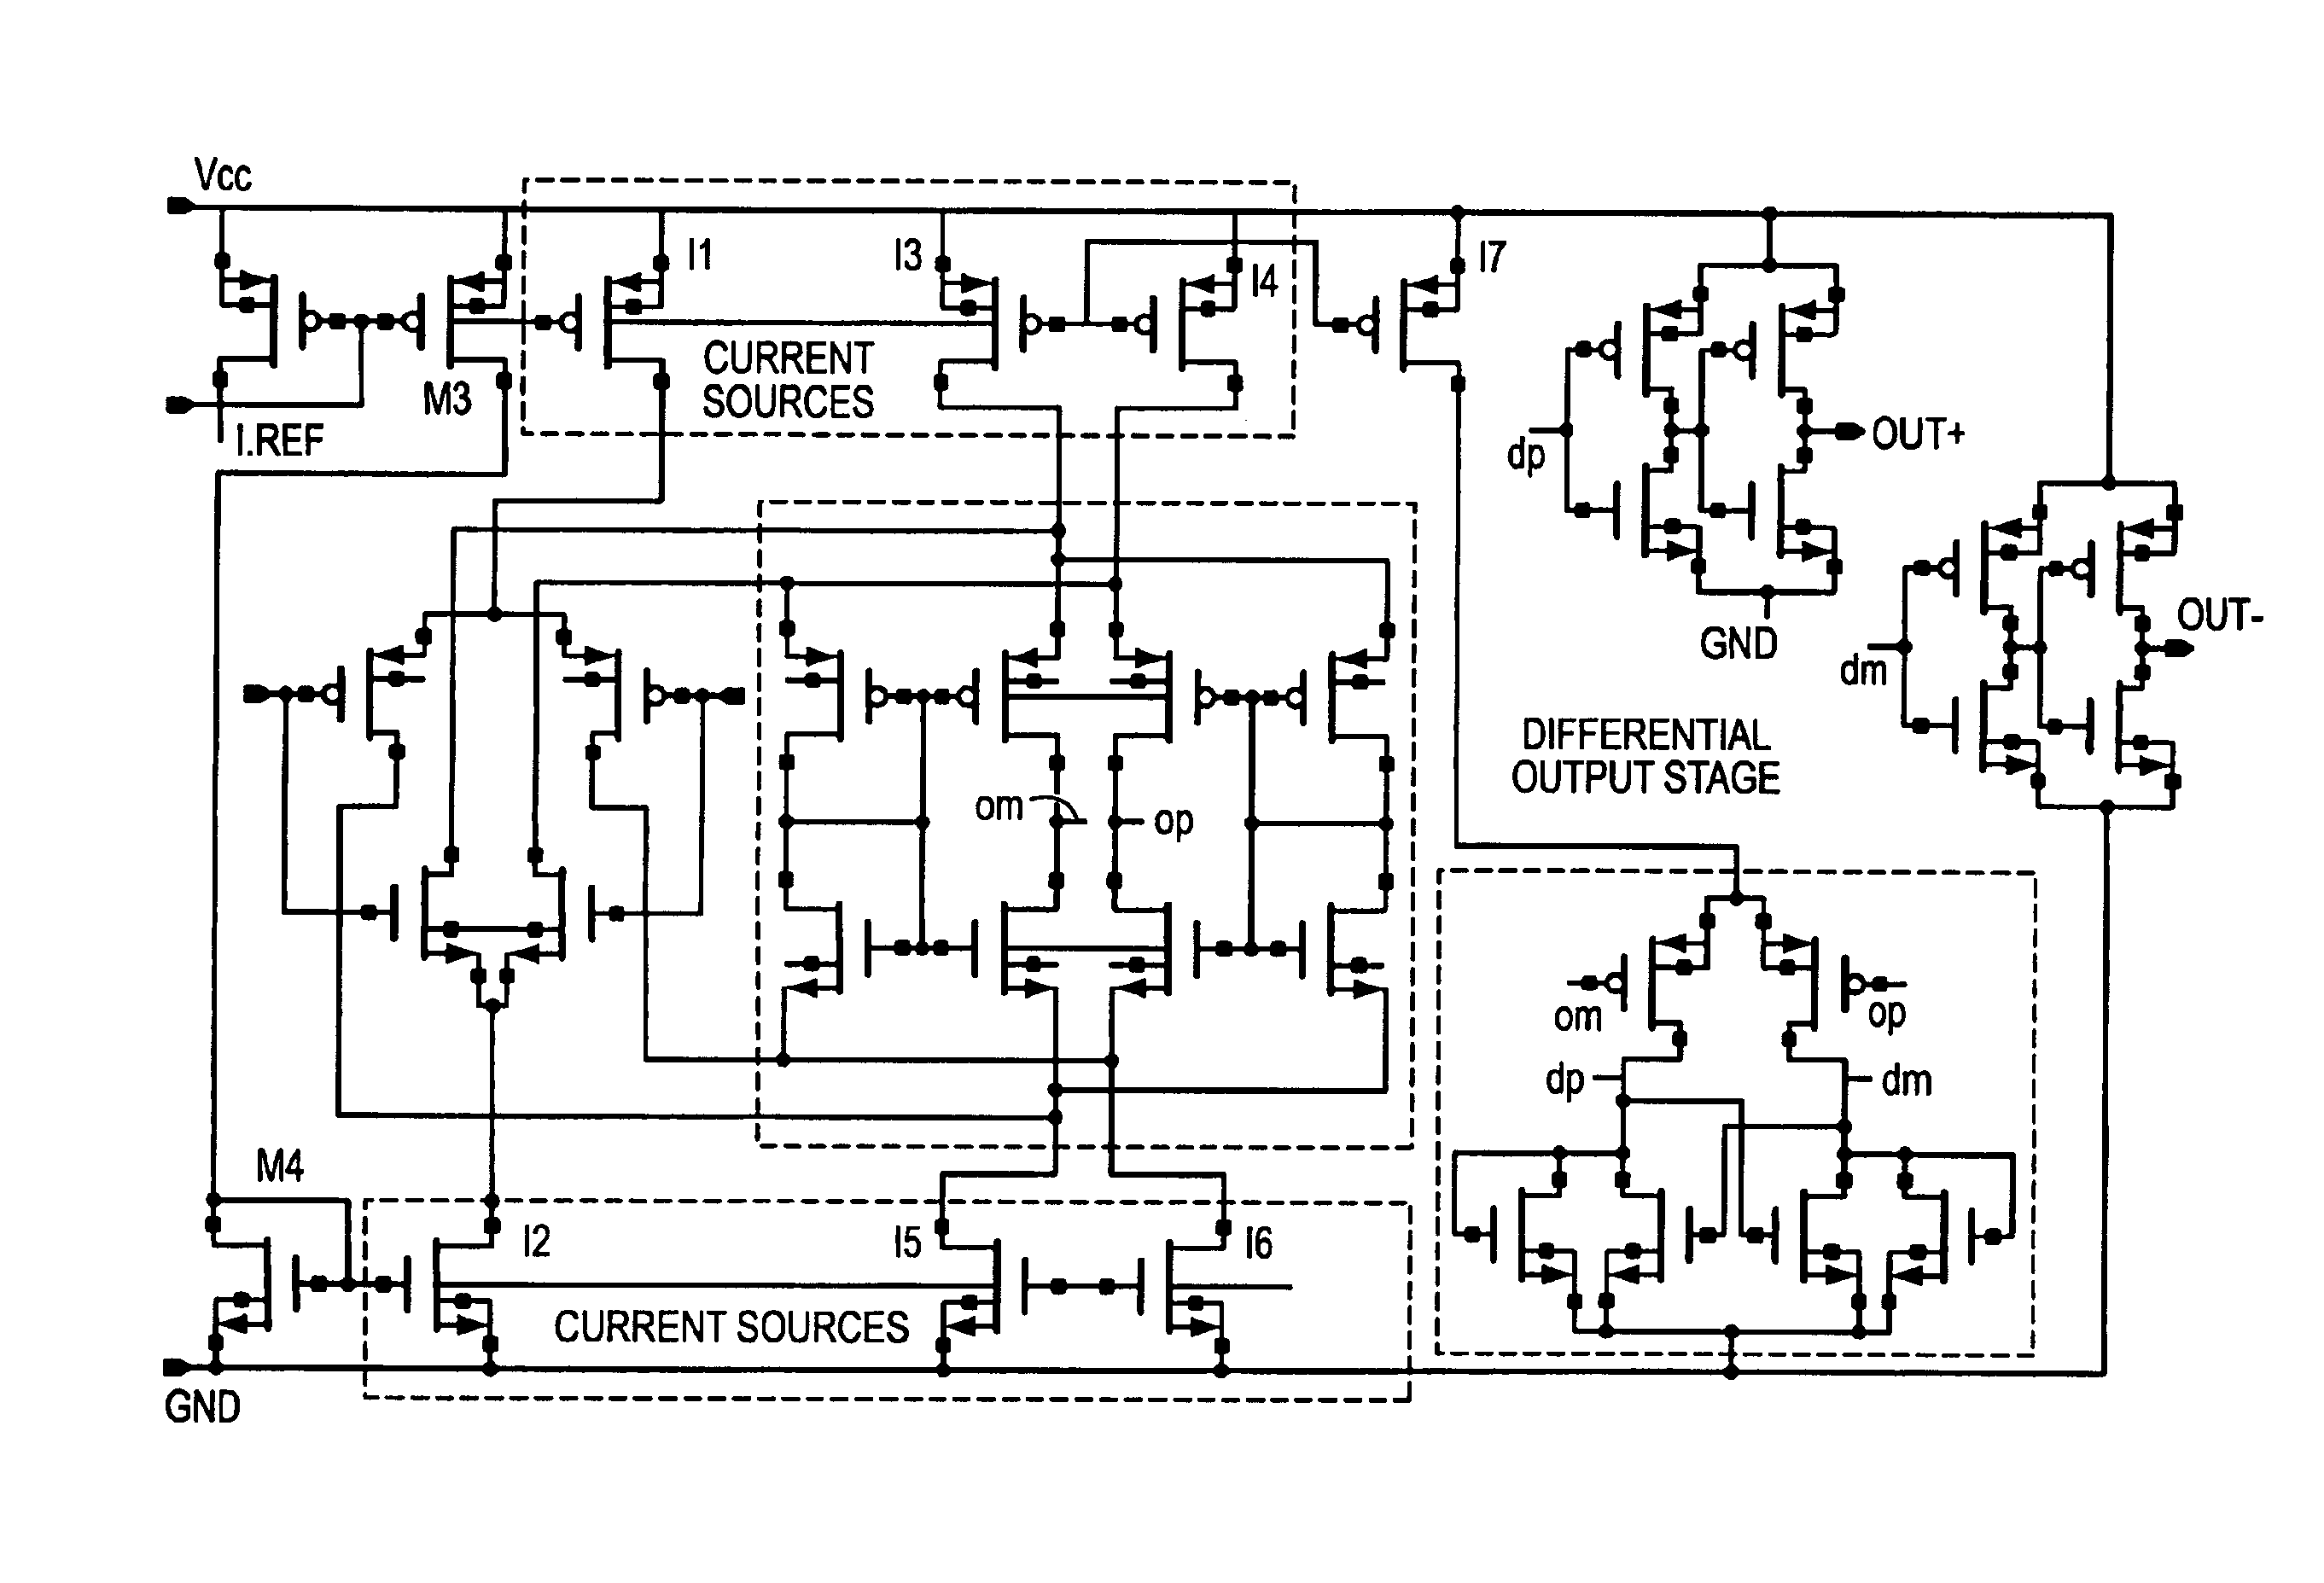 Low voltage differential in differential out receiver